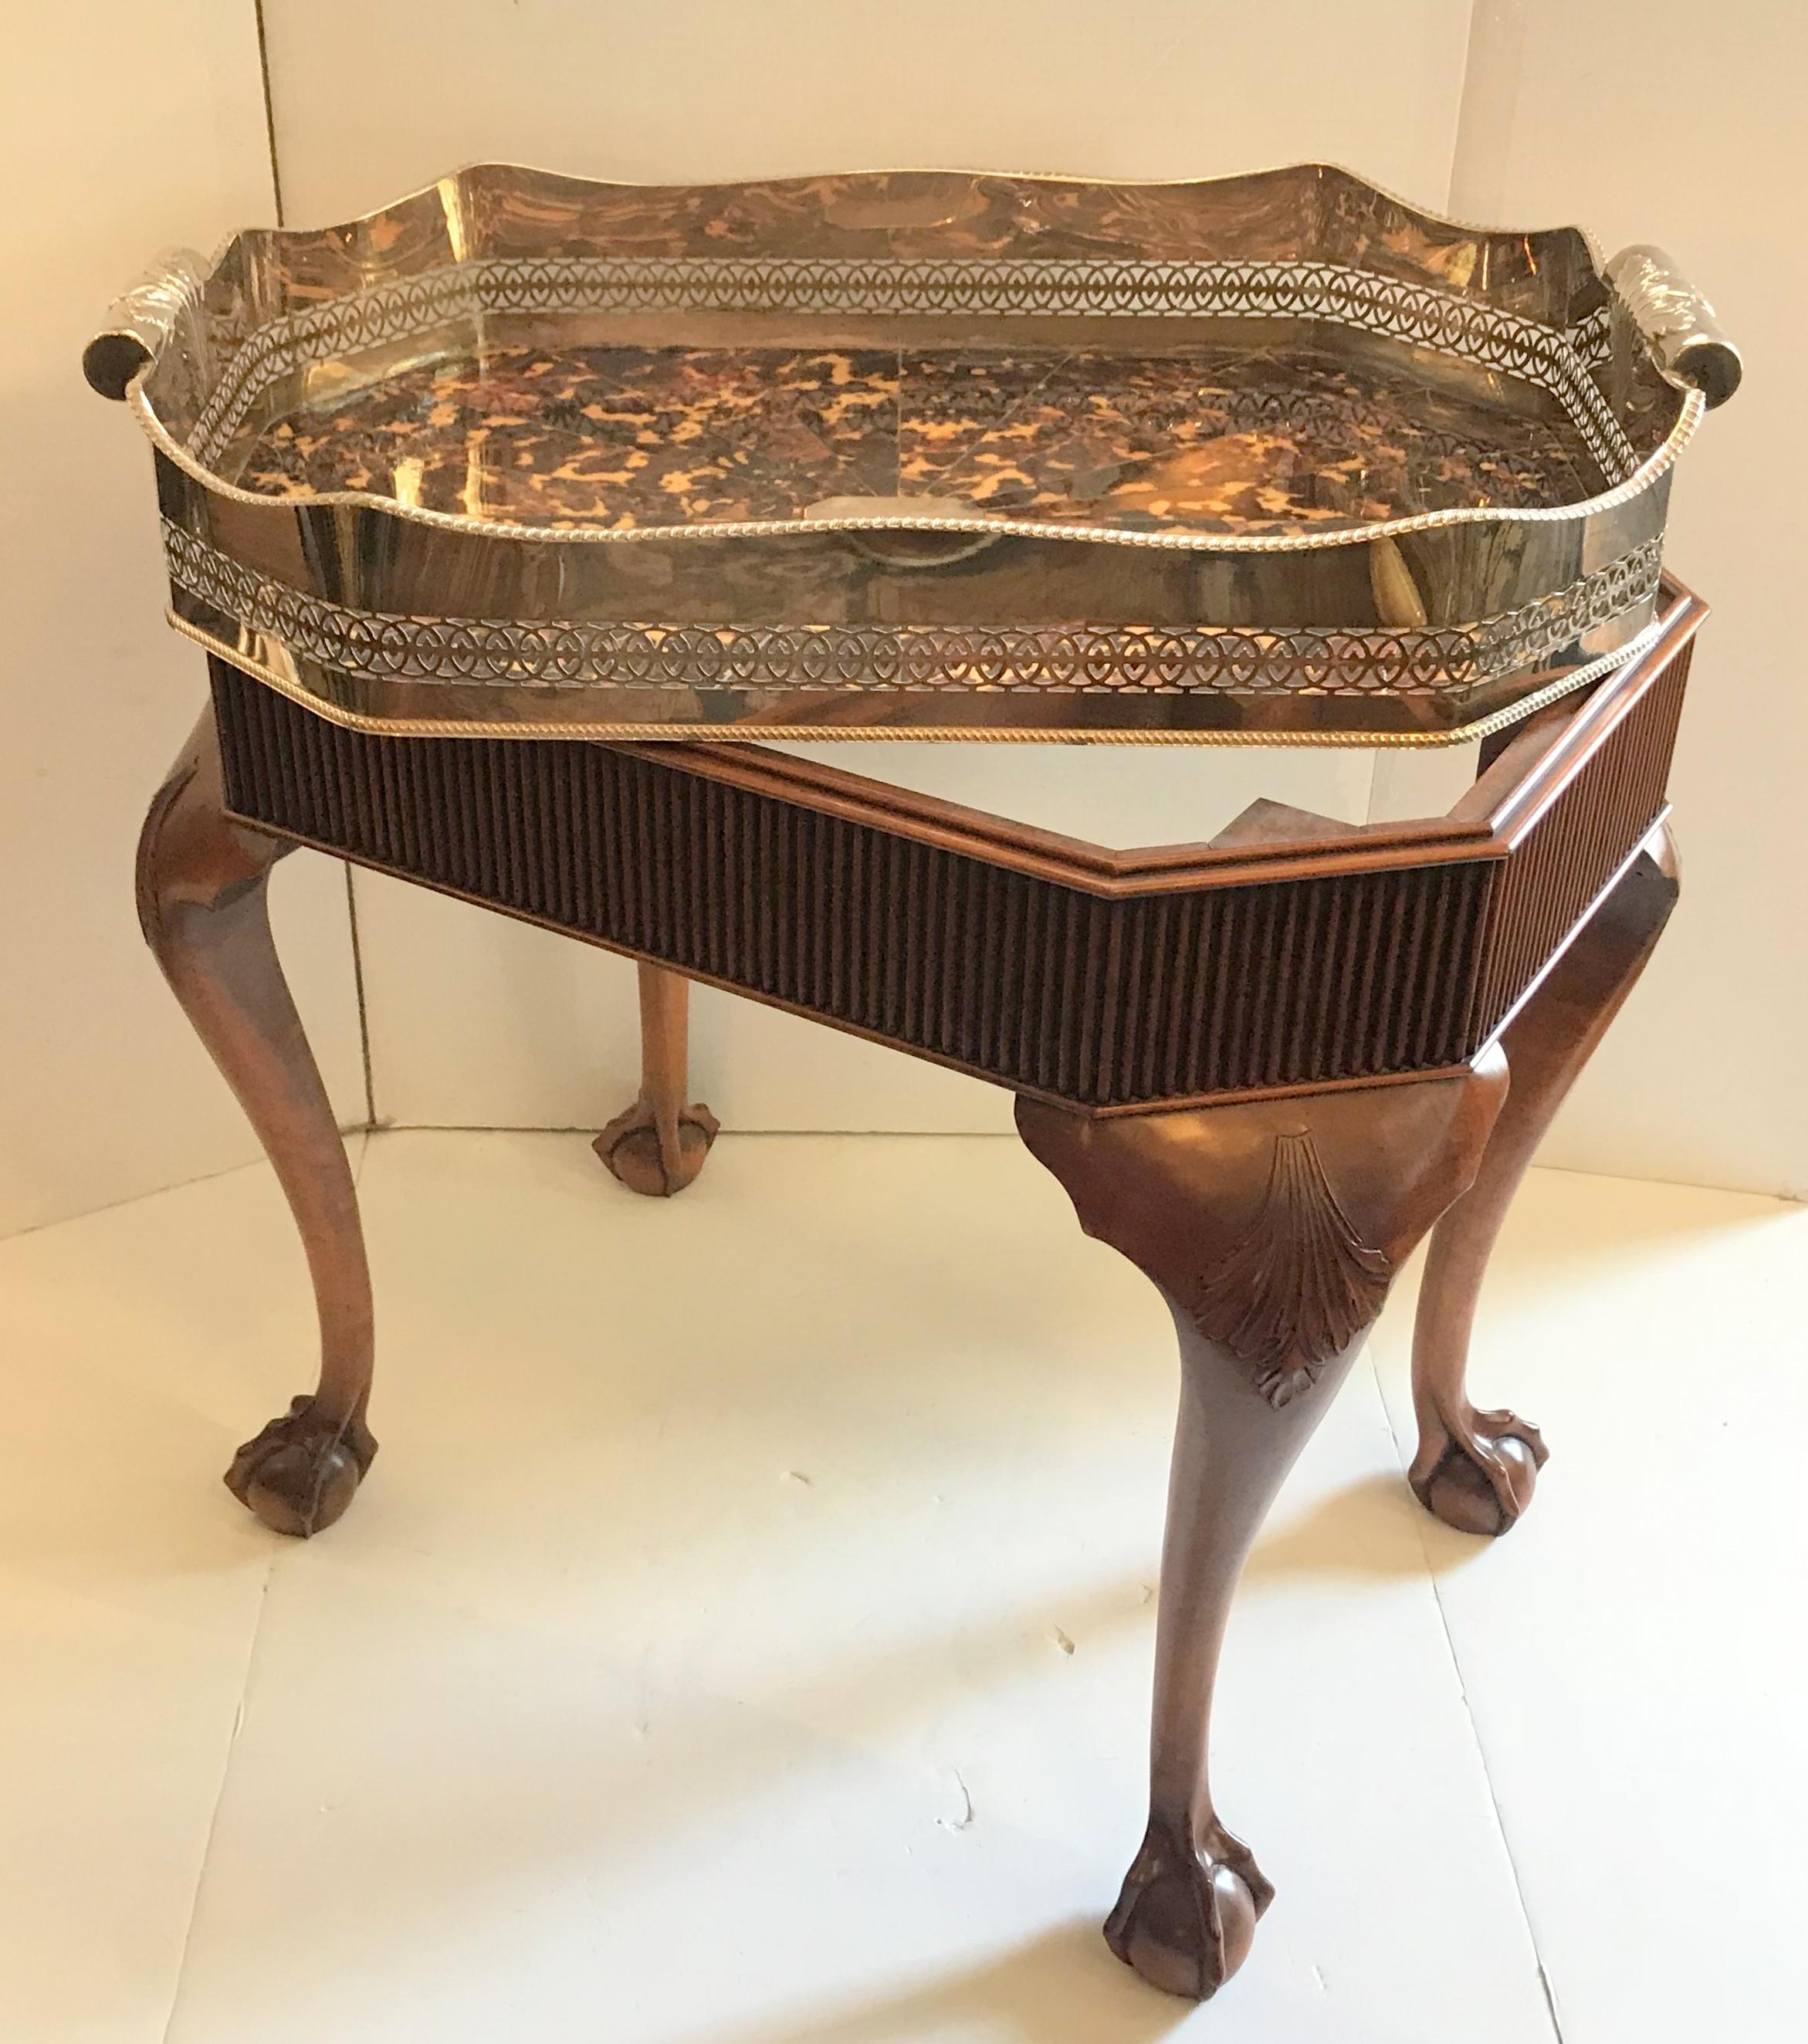 A wonderful faux tortoiseshell and silver plated English gallery tray, which can be removable from the mahogany table base that accompanies it. This beautiful serving piece has a prominent pierced and scalloped gallery and tooled with intricate fret